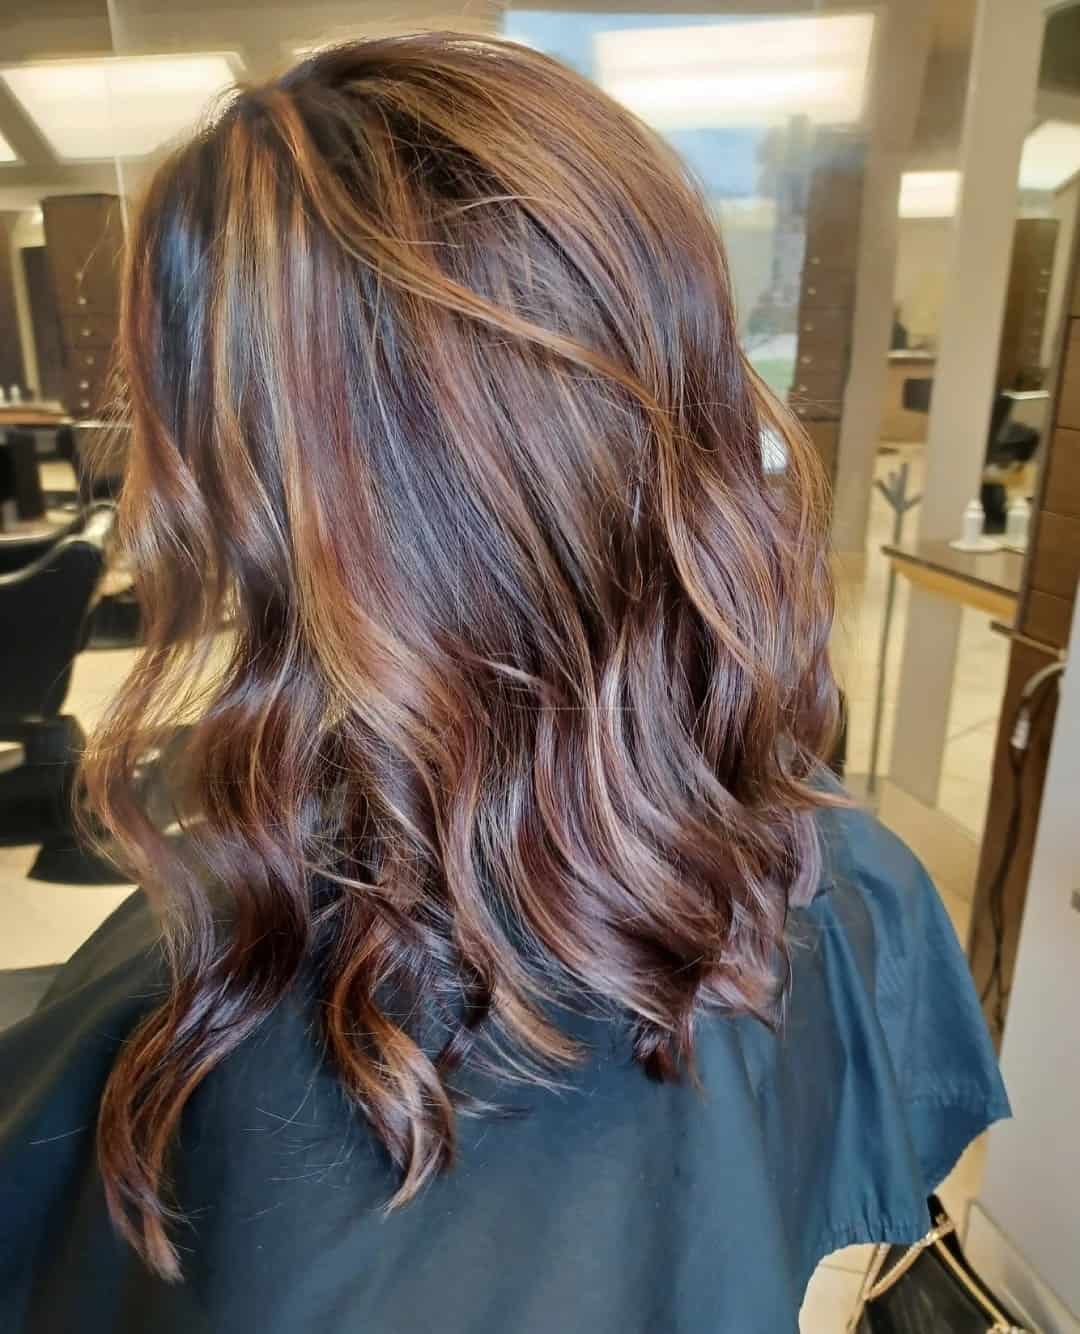 Blonde And Copper Highlights On Brown Hair